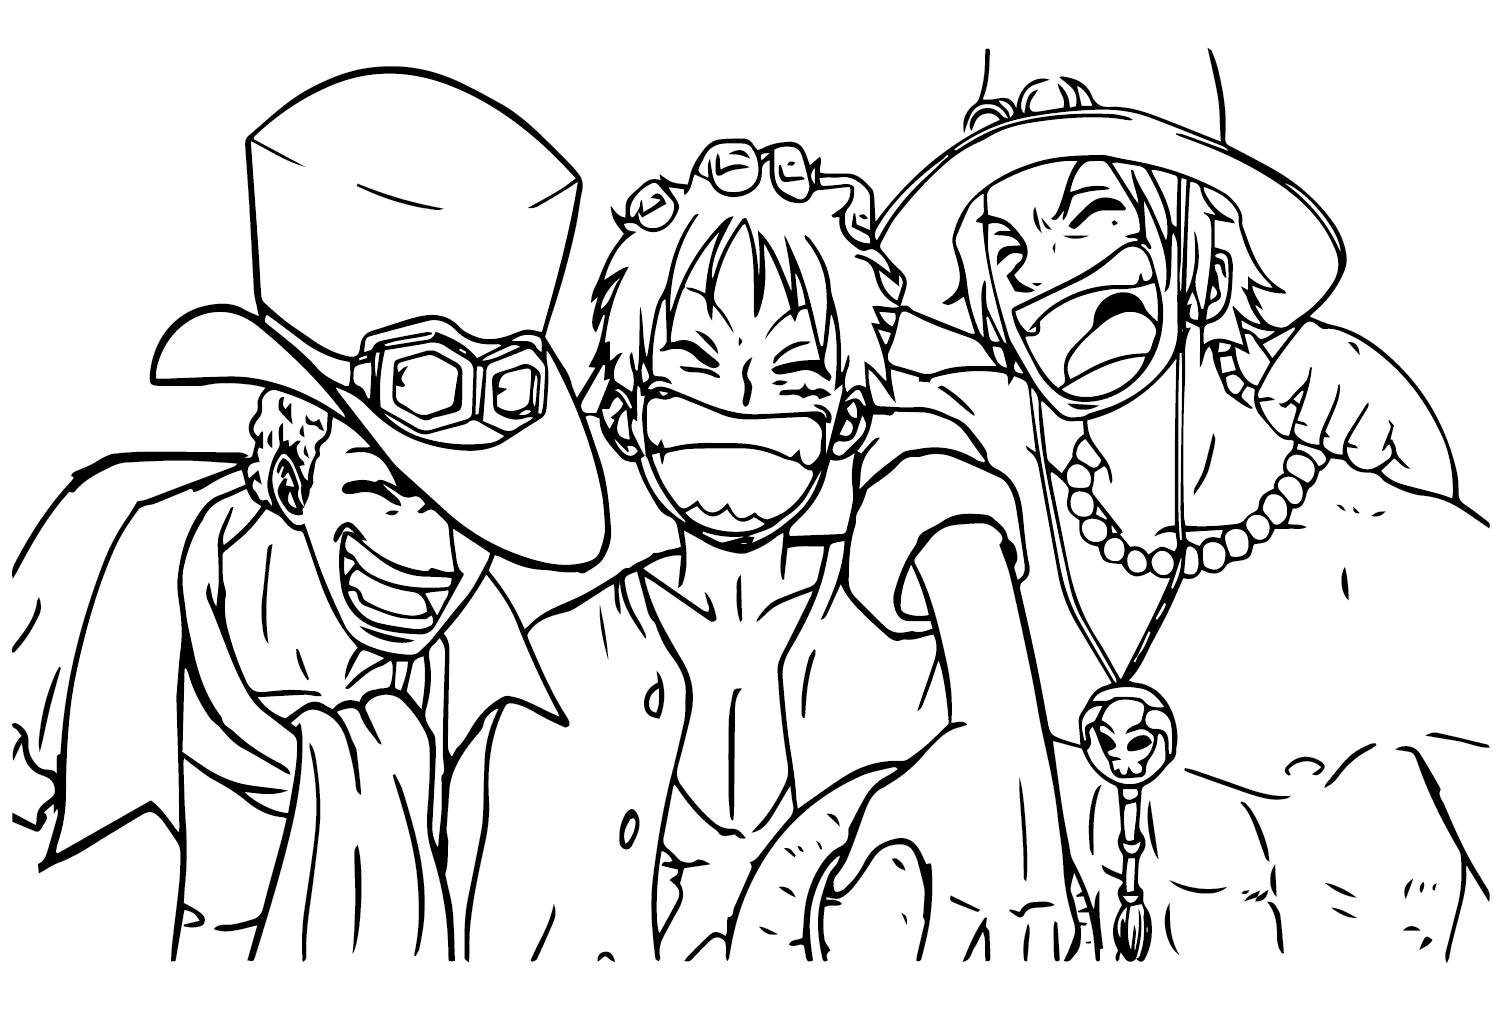 Sabo, Luffy and Ace to Color from Luffy